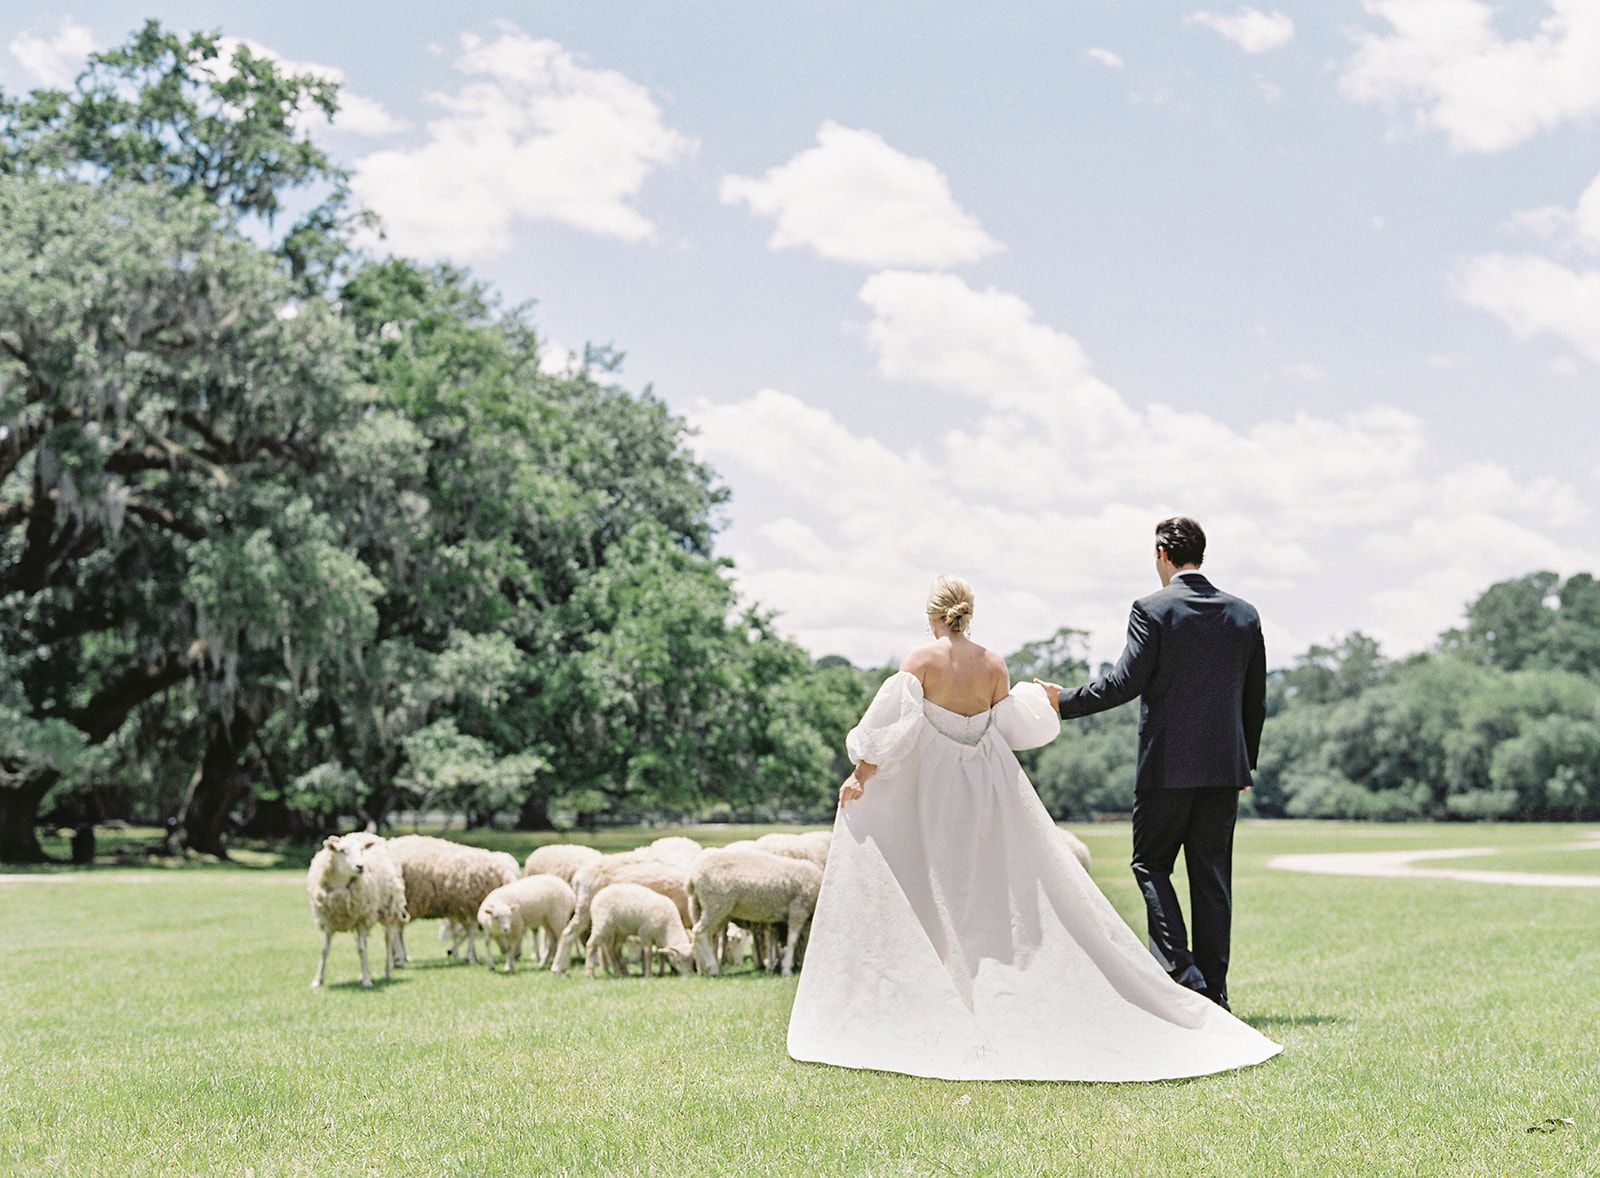 Bride and groom holding hands in a field while sheep graze nearby